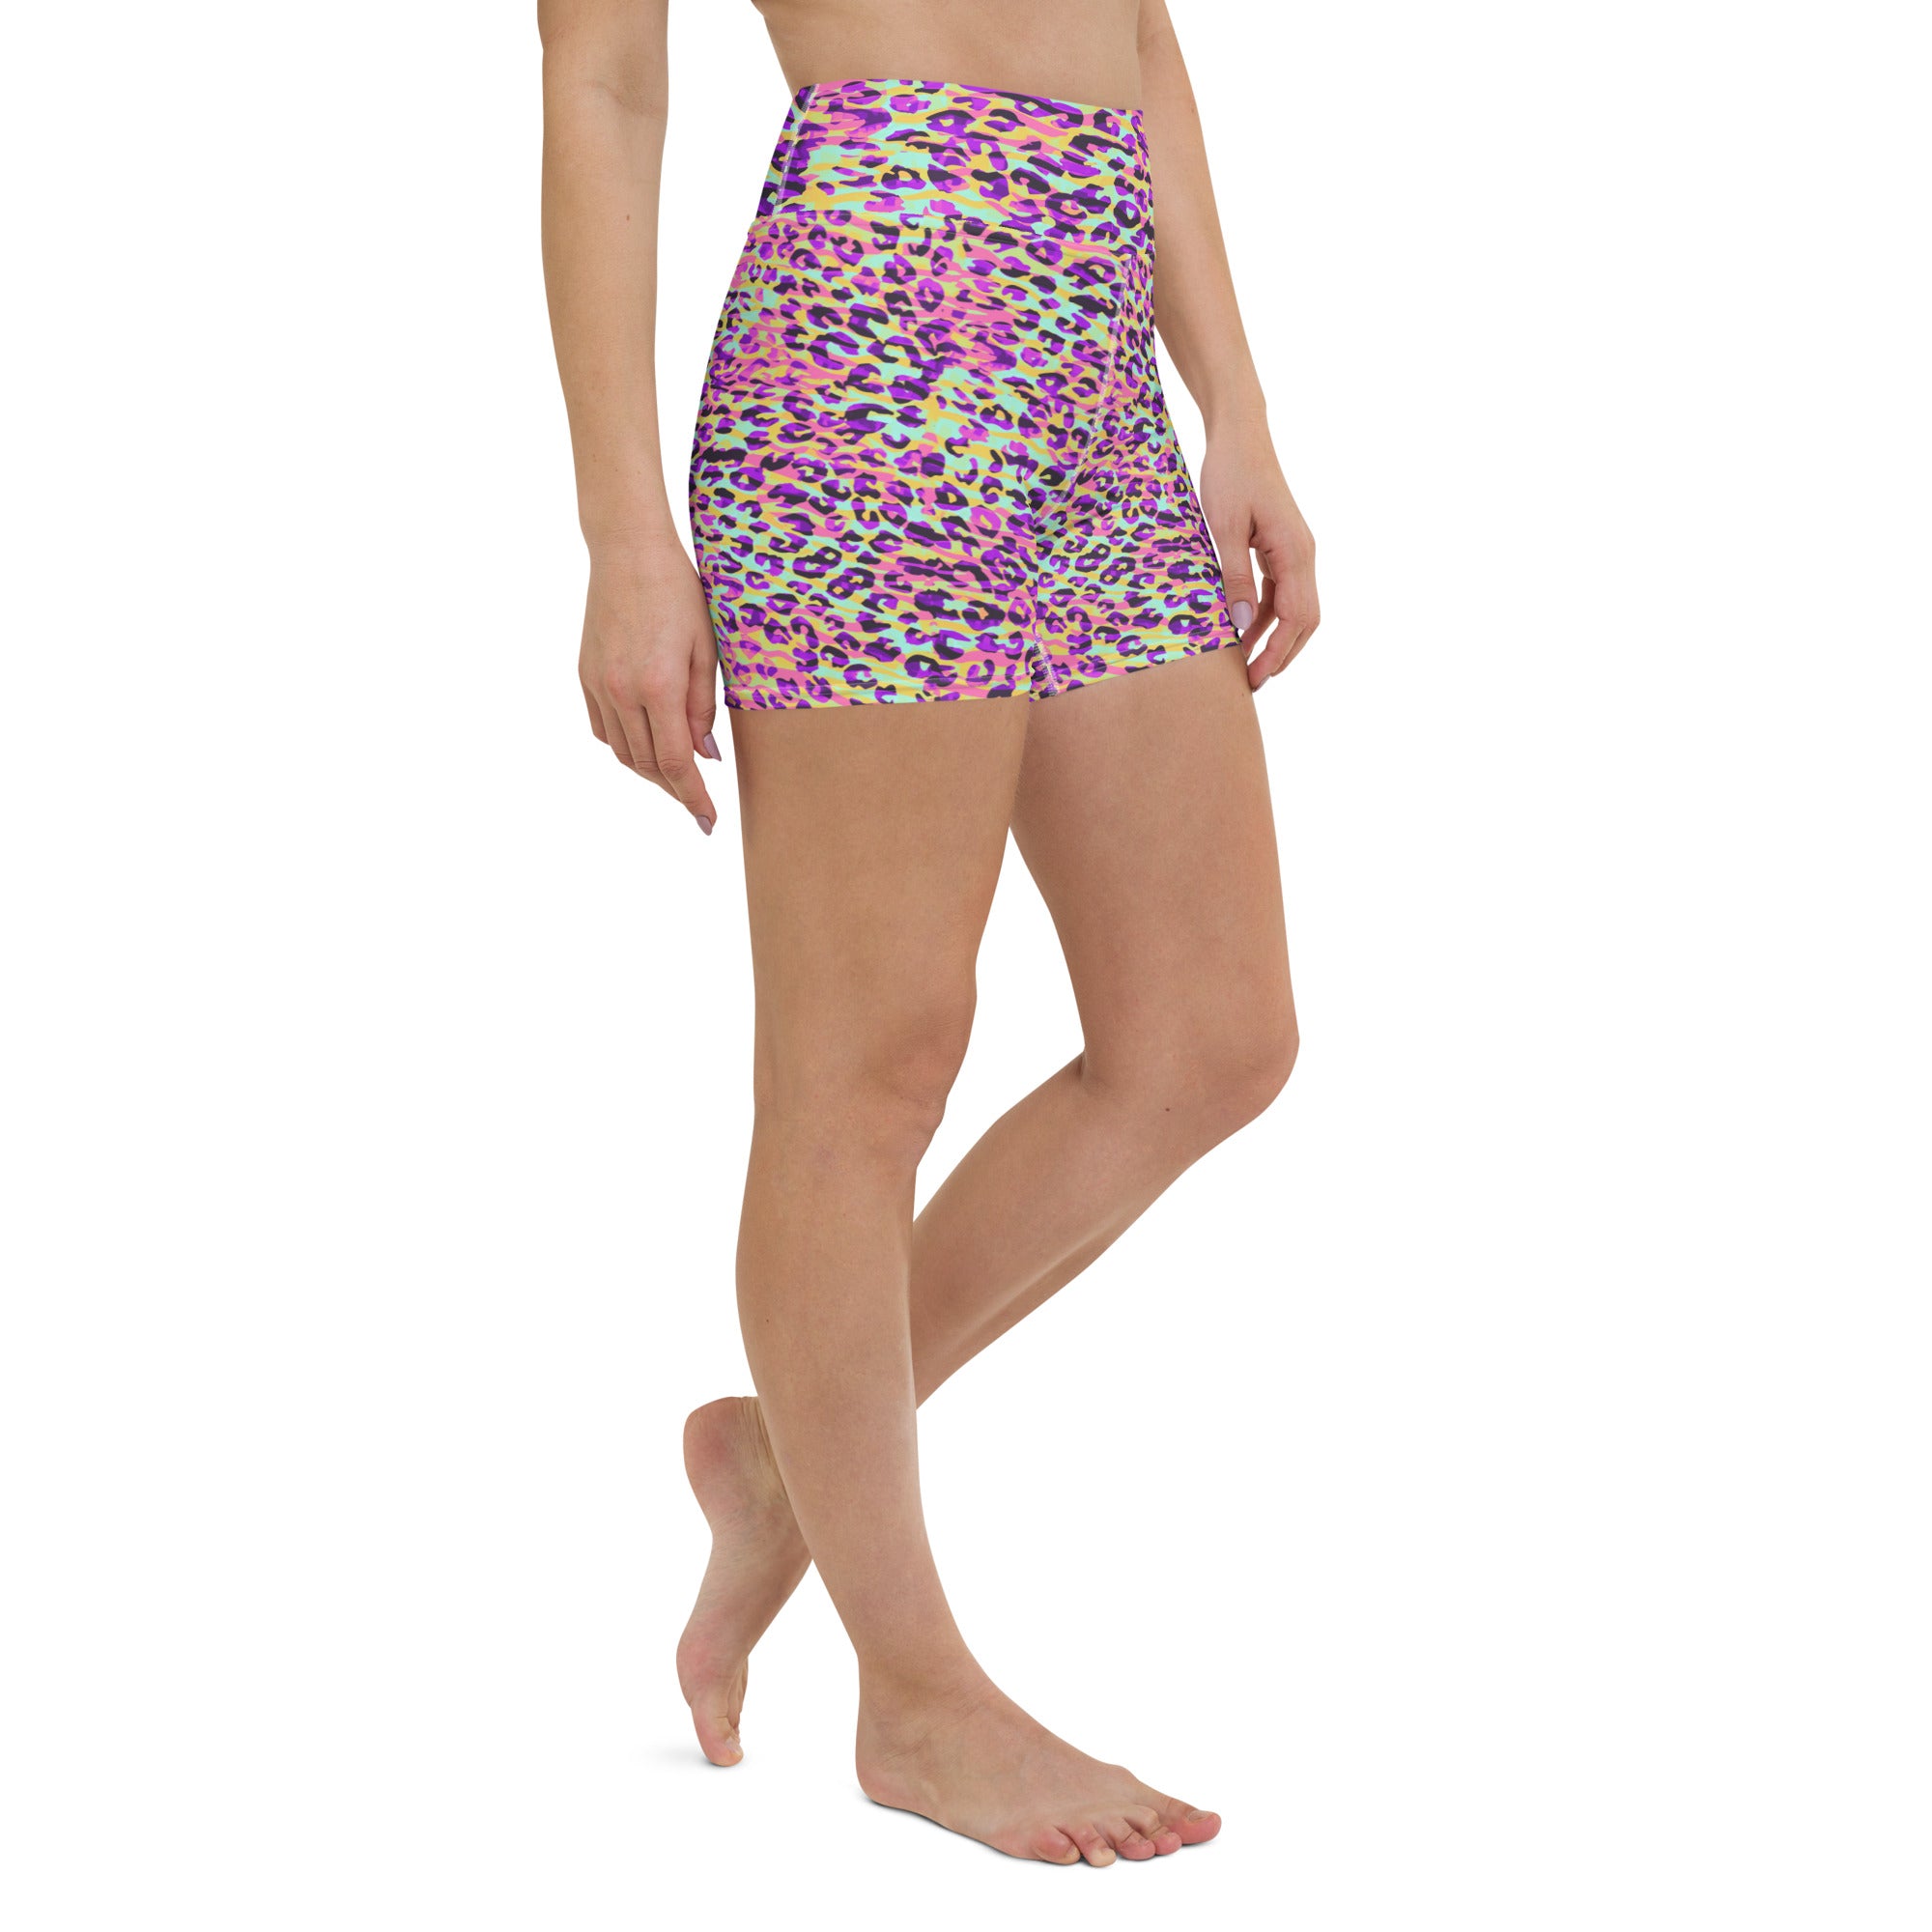 Yoga Shorts- ZEBRA AND LEOPARD PRINT PINK WITH YELLOW